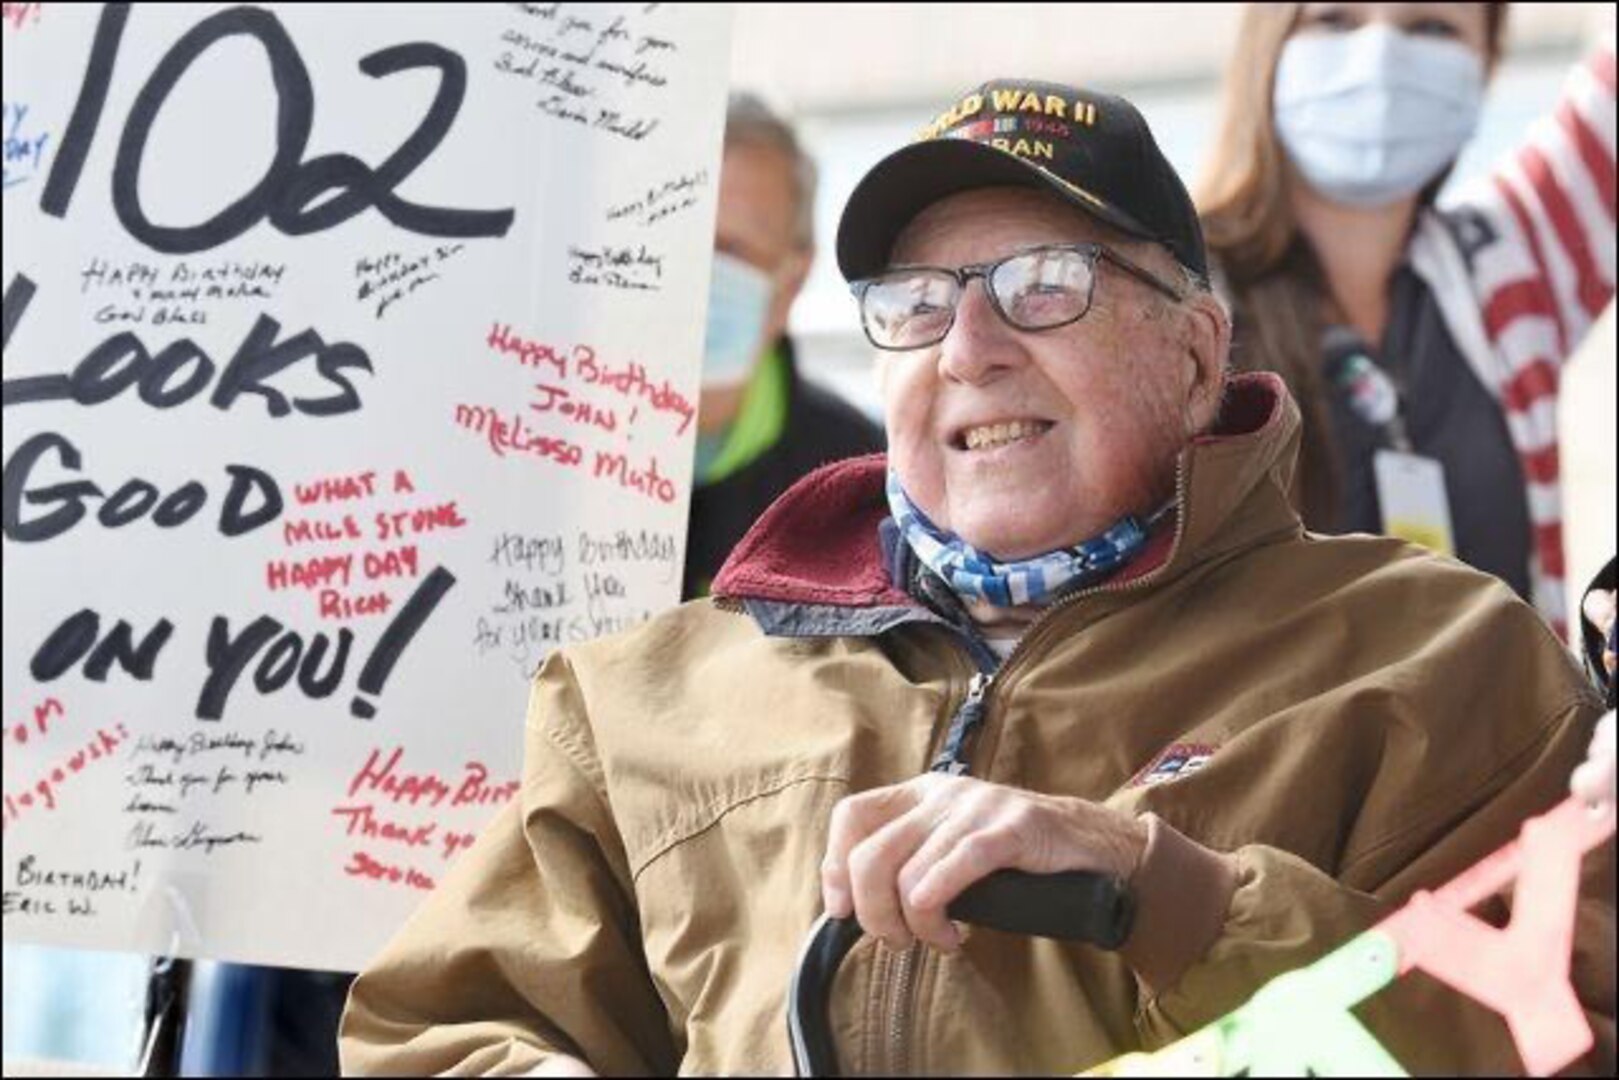 Retired Lt. Col. John Mahler, who was once assigned to the 342nd Bombardment Squadron, celebrates his 102nd birthday as he watches a parade of military and first responder vehicles pass the Butler Veterans Affairs Health Care Wellness Center on Nov. 12, 2020, in Butler, Pa.